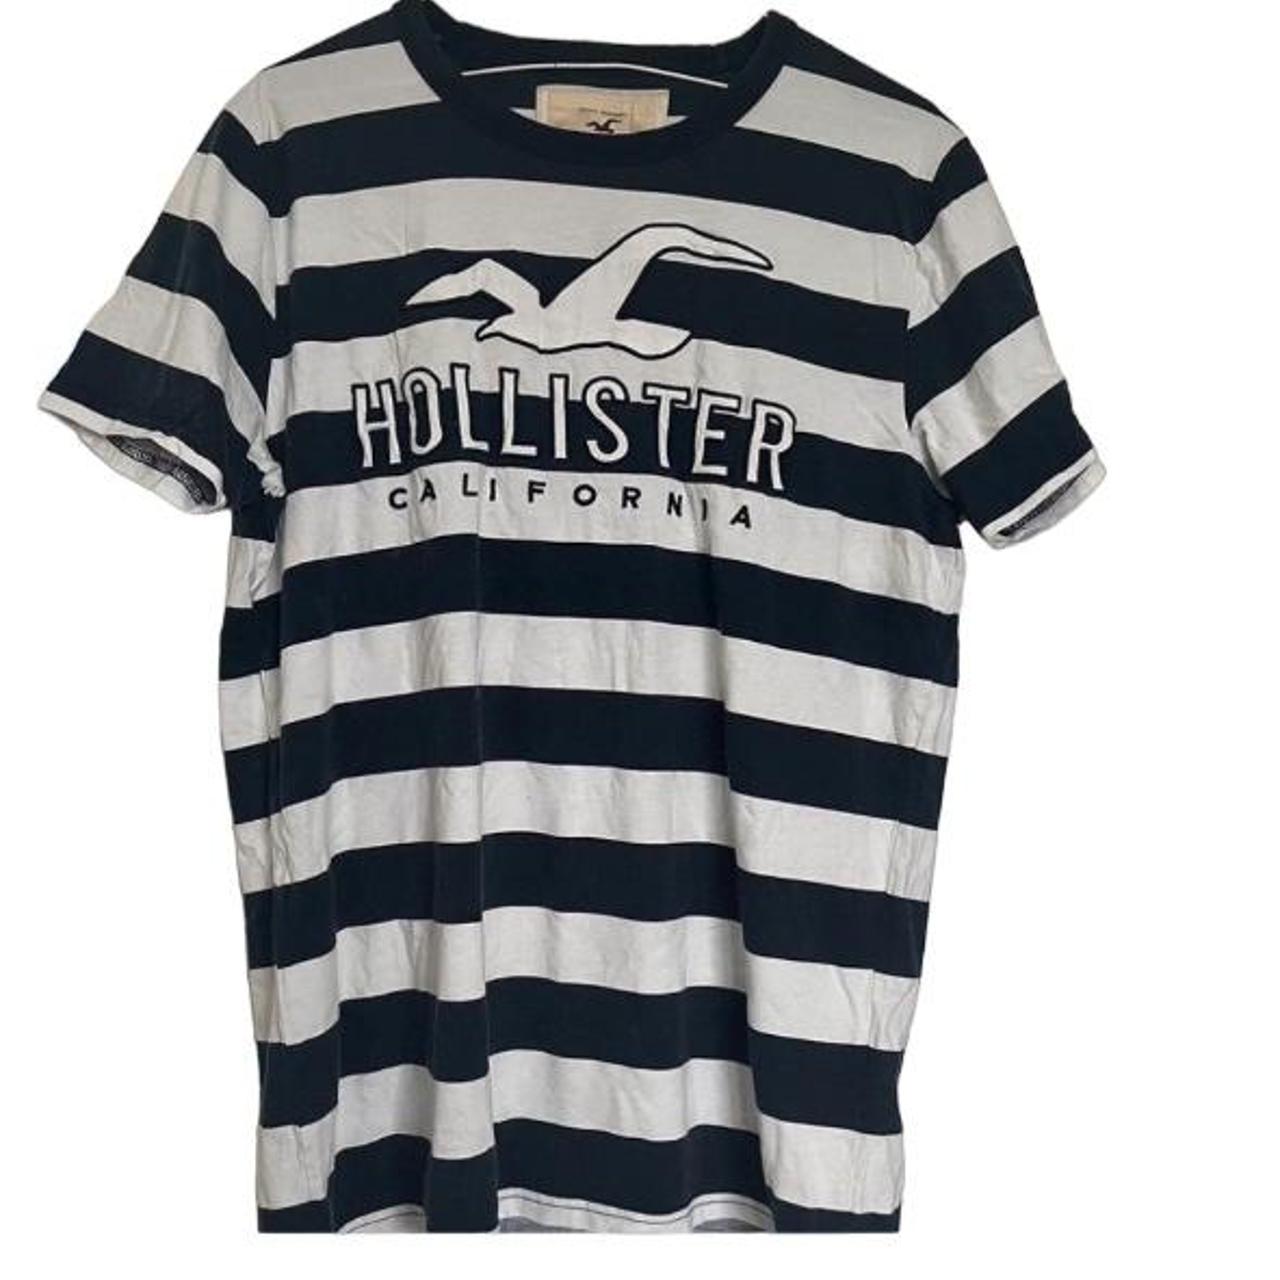 Hollister navy and white striped tshirt Good - Depop